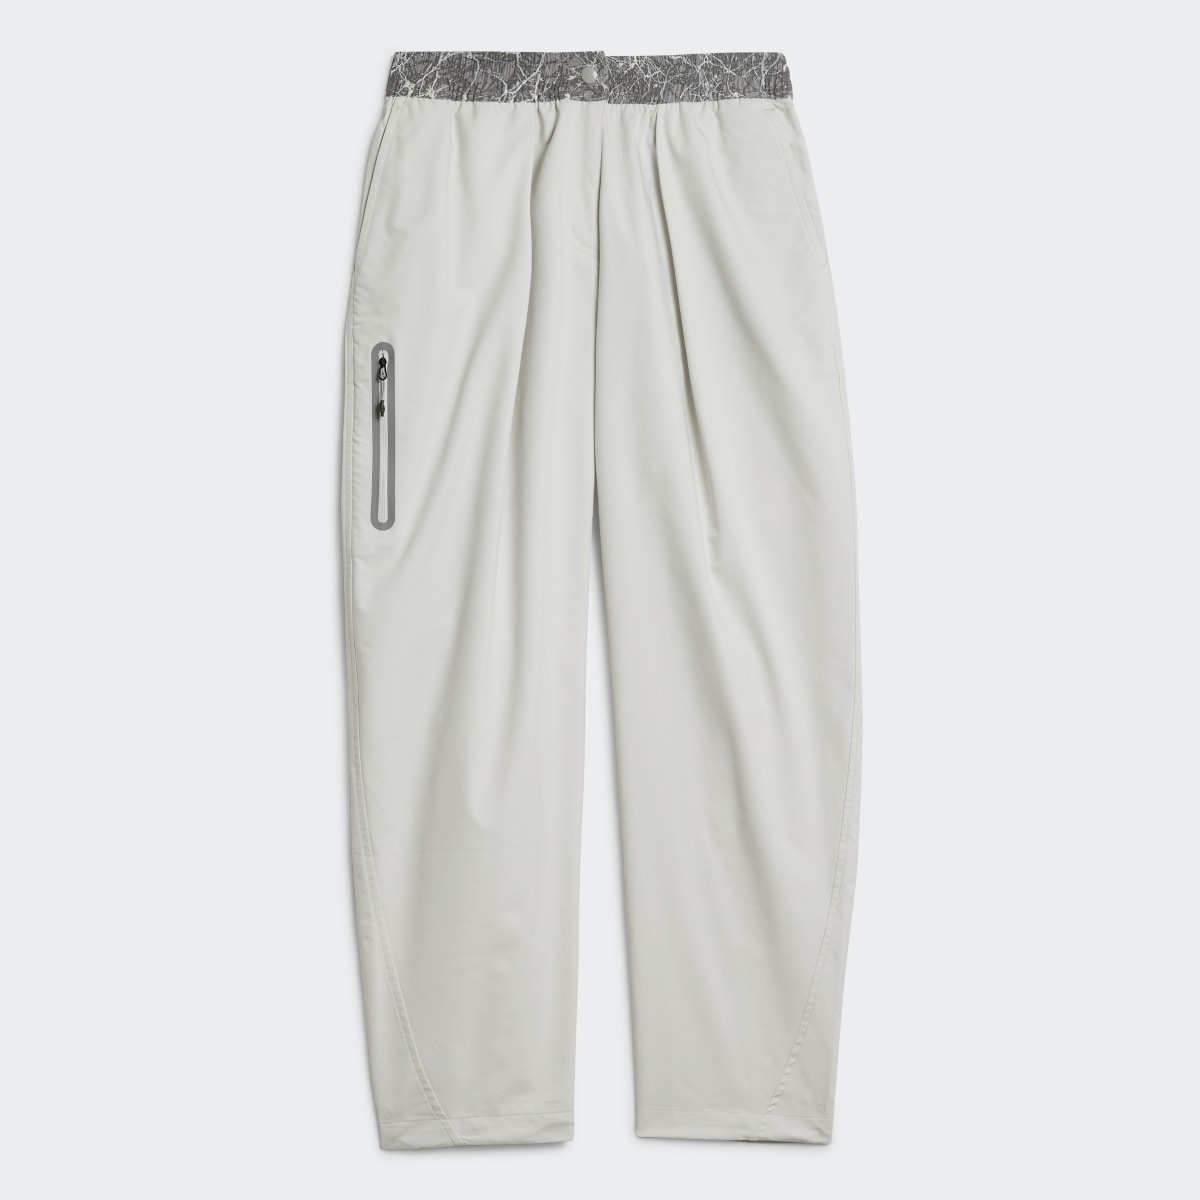 Adidas Terrex x and wander Trousers. 4